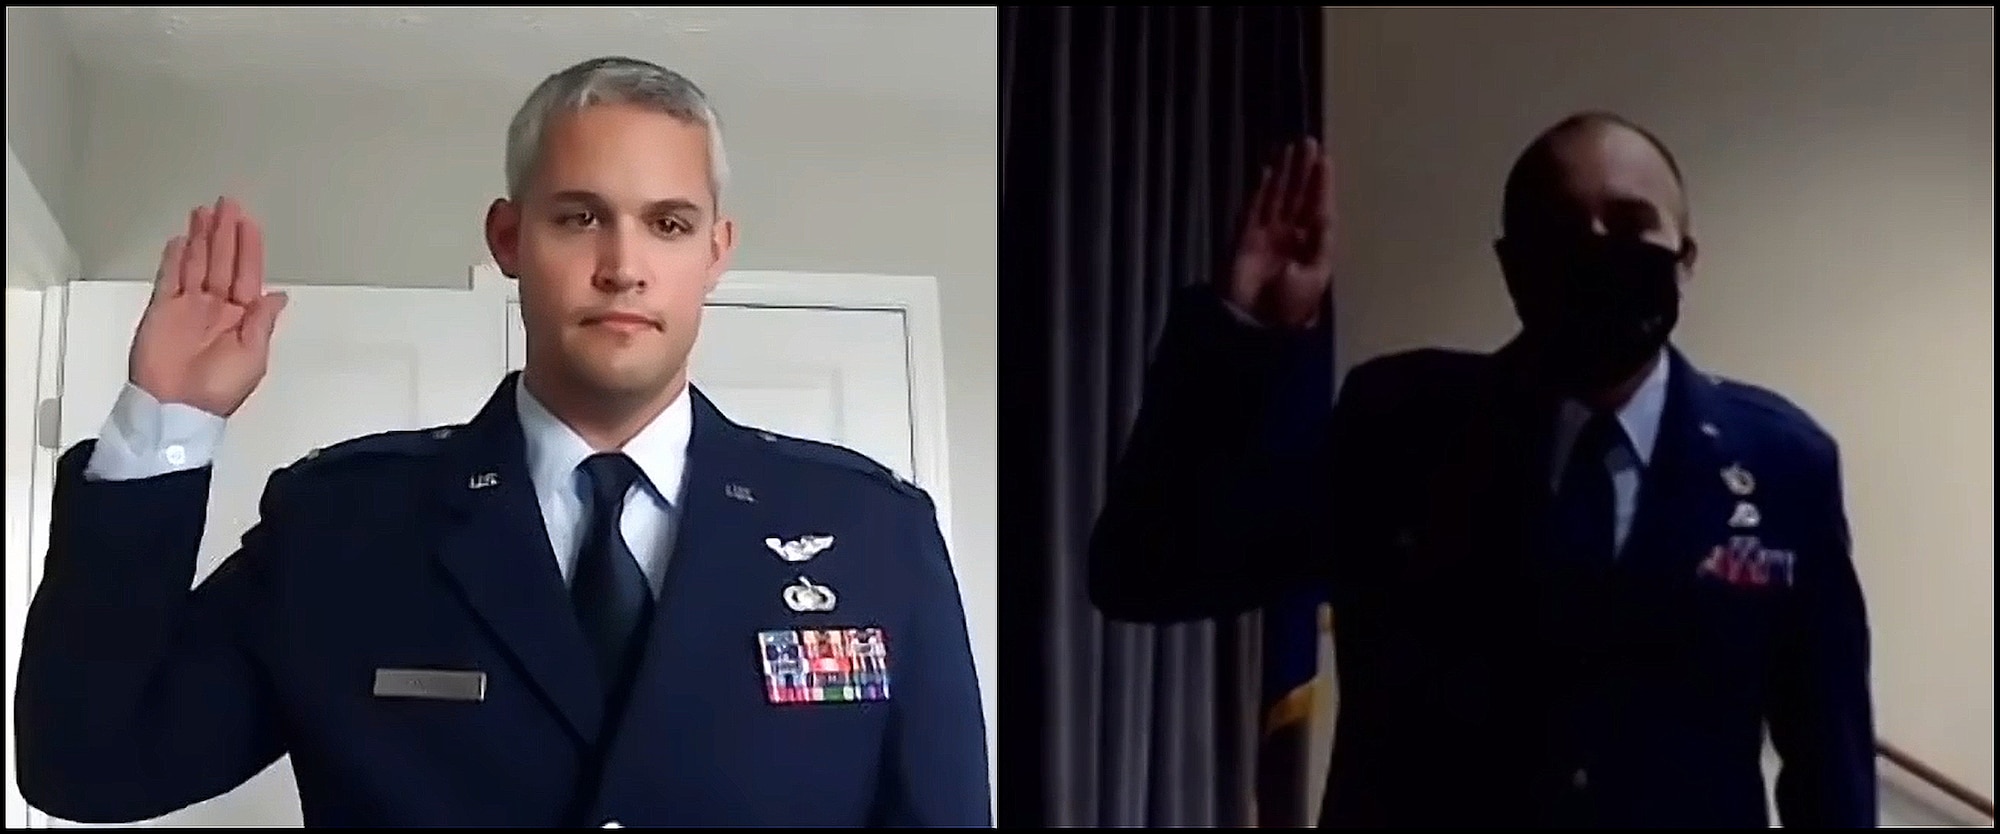 (Then) Officer Trainee Samuel Vasquez, 63rd Intelligence Squadron, affirms the Oath of Office, administered virtually by his former 63rd IS colleague, 2nd Lt. Christopher Ramirez, 71st Intelligence Squadron. Vasquez will continue to serve at the 42nd Intelligence Squadron. Ramirez and Vasquez were each selected for a chance to commission during the 655 ISRW’s Non-Extended Active Duty Airmen Commissioning Program boards of 2018 and 2019, and are now leading elsewhere within the 655th Intelligence, Surveillance and Reconnaissance Wing. (U.S. Air Force photo by 2nd Lt. Christopher P. Ramirez)